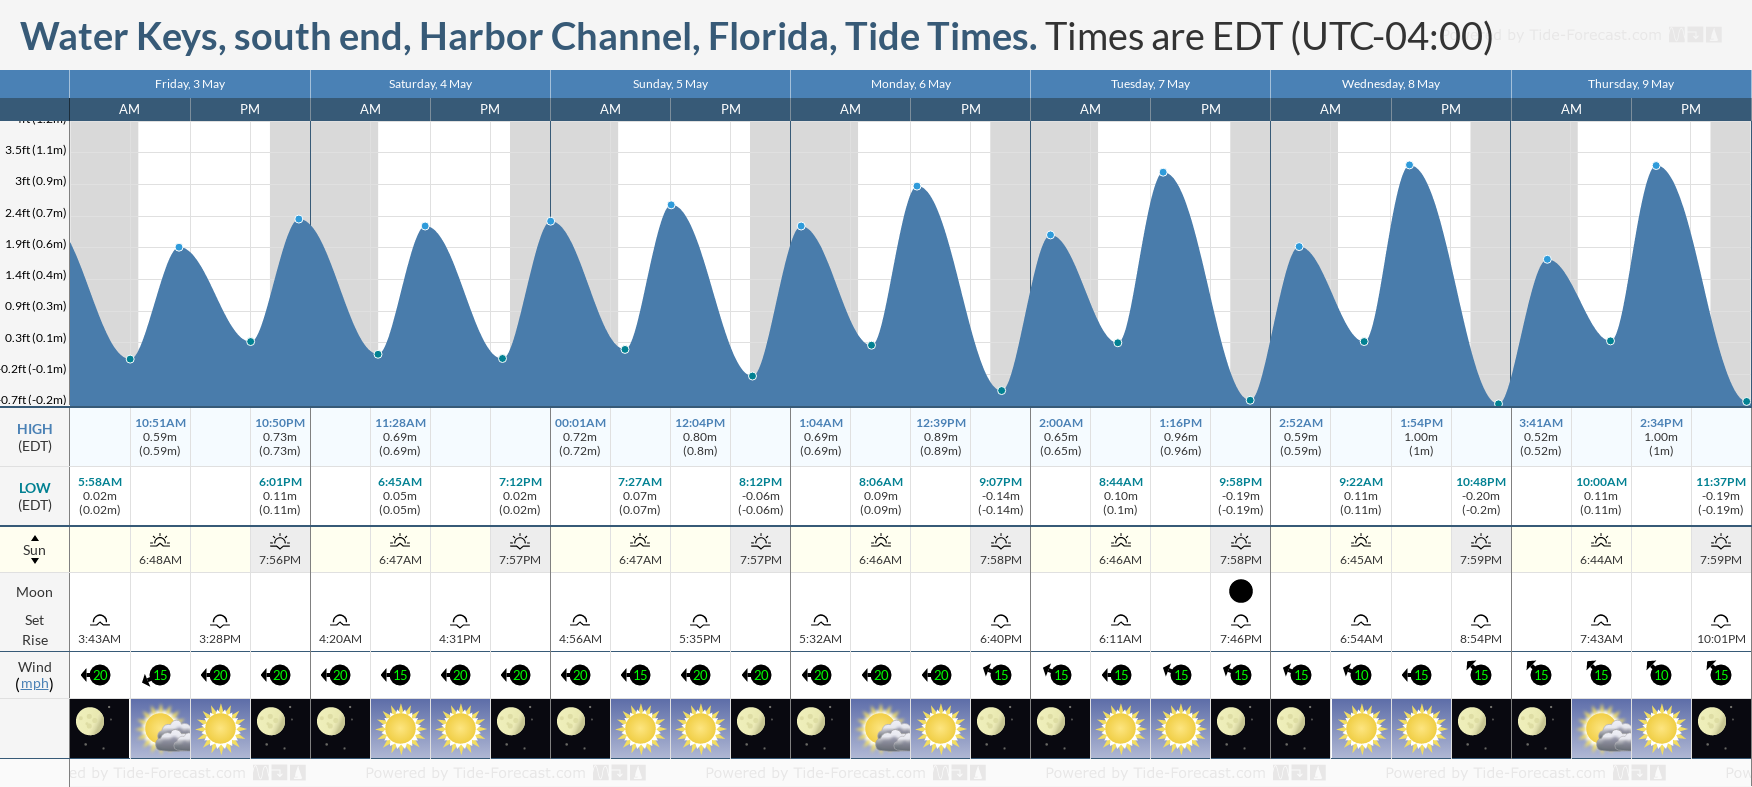 Water Keys, south end, Harbor Channel, Florida Tide Chart including high and low tide times for the next 7 days